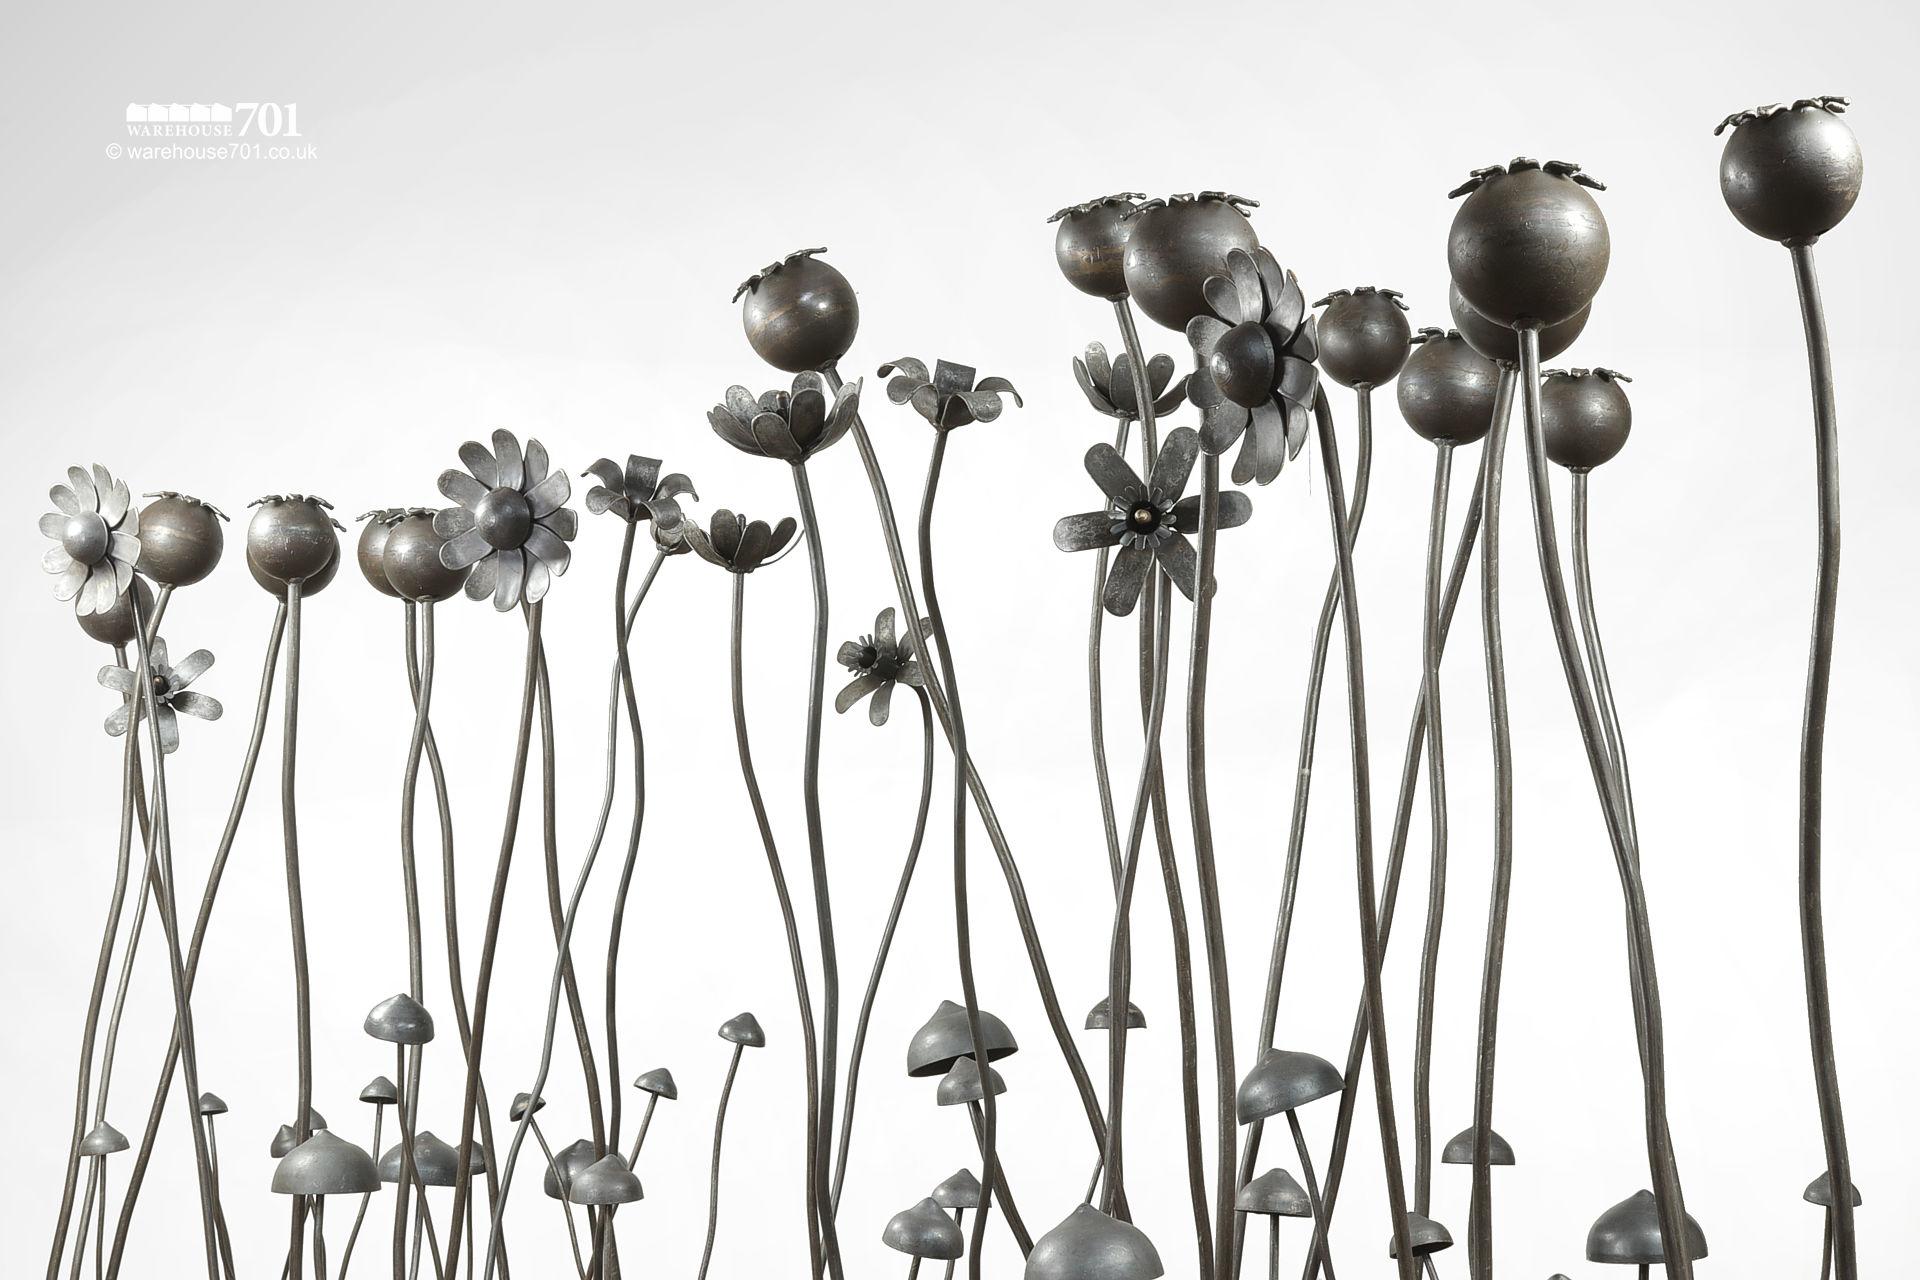 NEW Full Sized Sculptured Hand Made Metal Flowers and Fungi #2